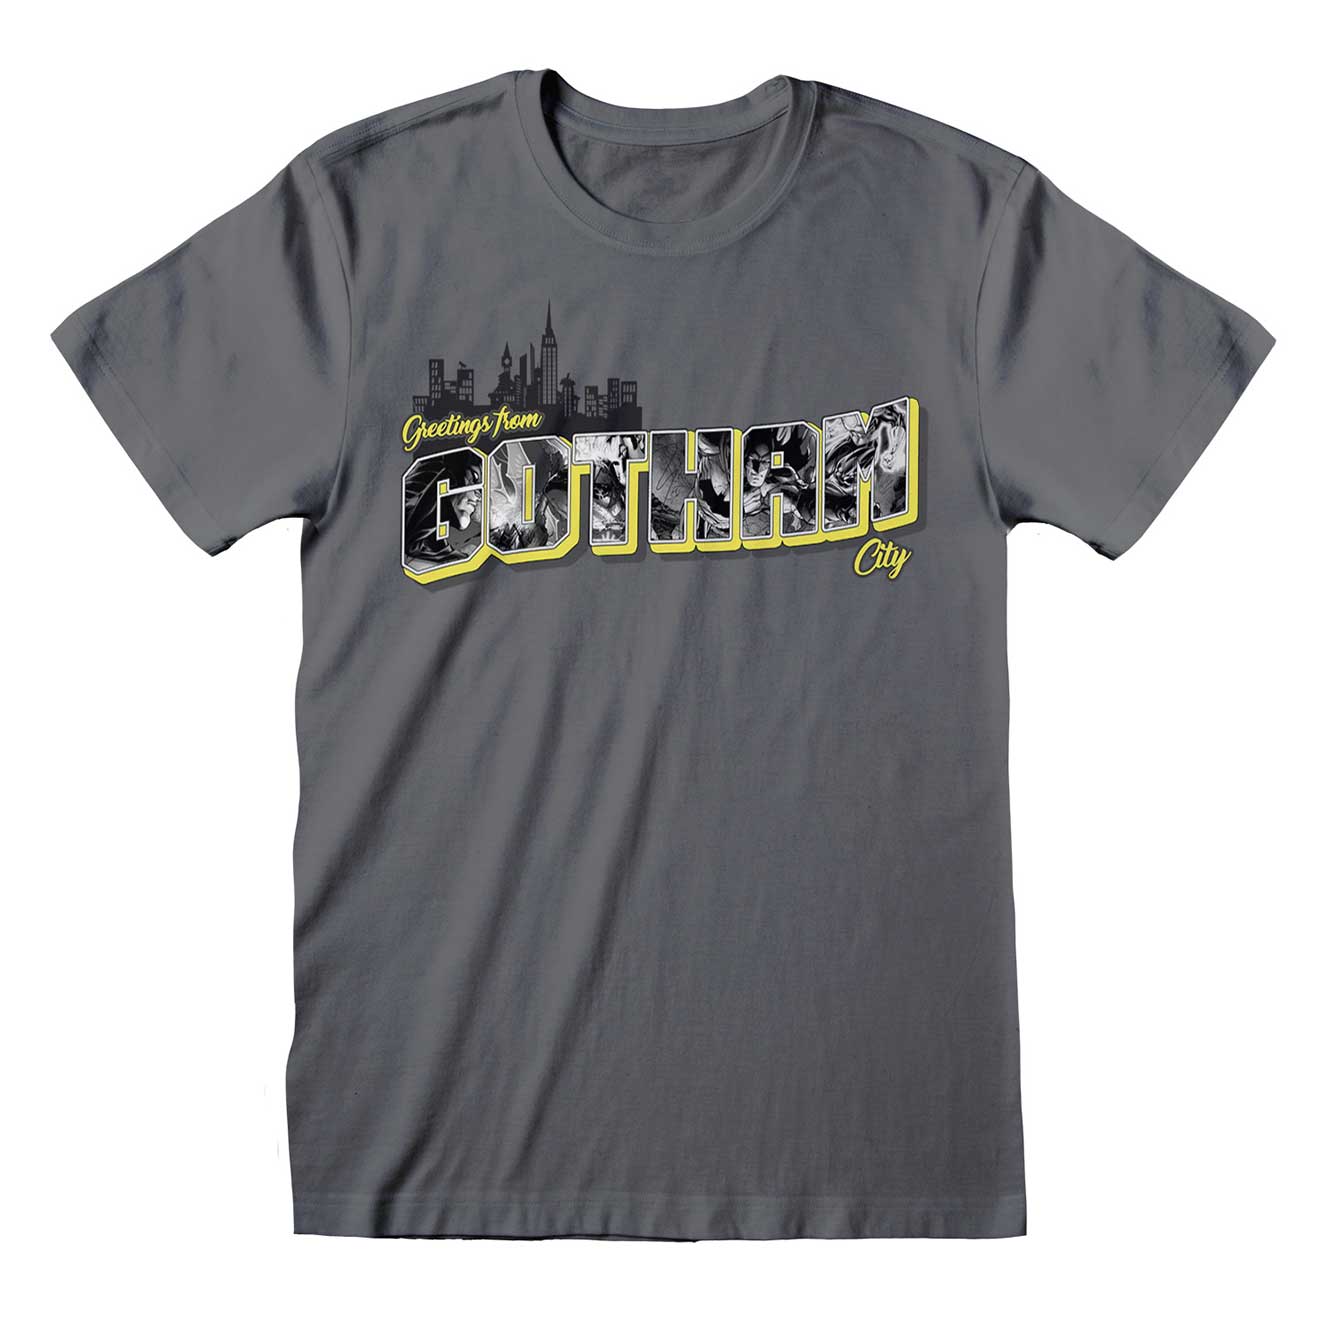 Greetings From Gotham City T-shirt